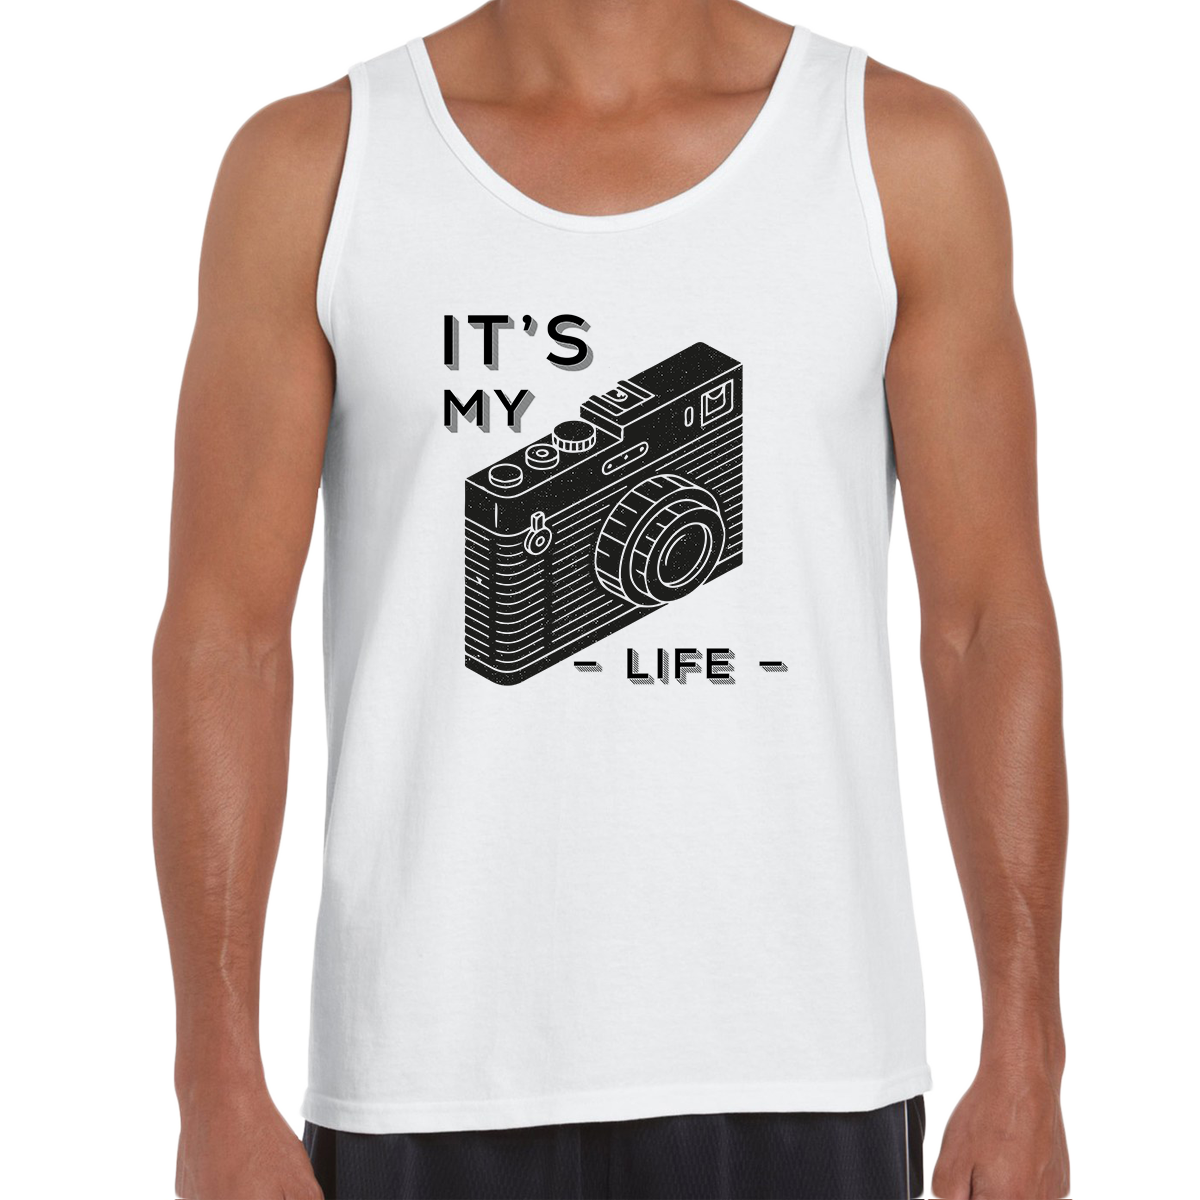 It Is My Life Vintage Old Camera Funny Typography T-shirt For Photographers - Kuzi Tees